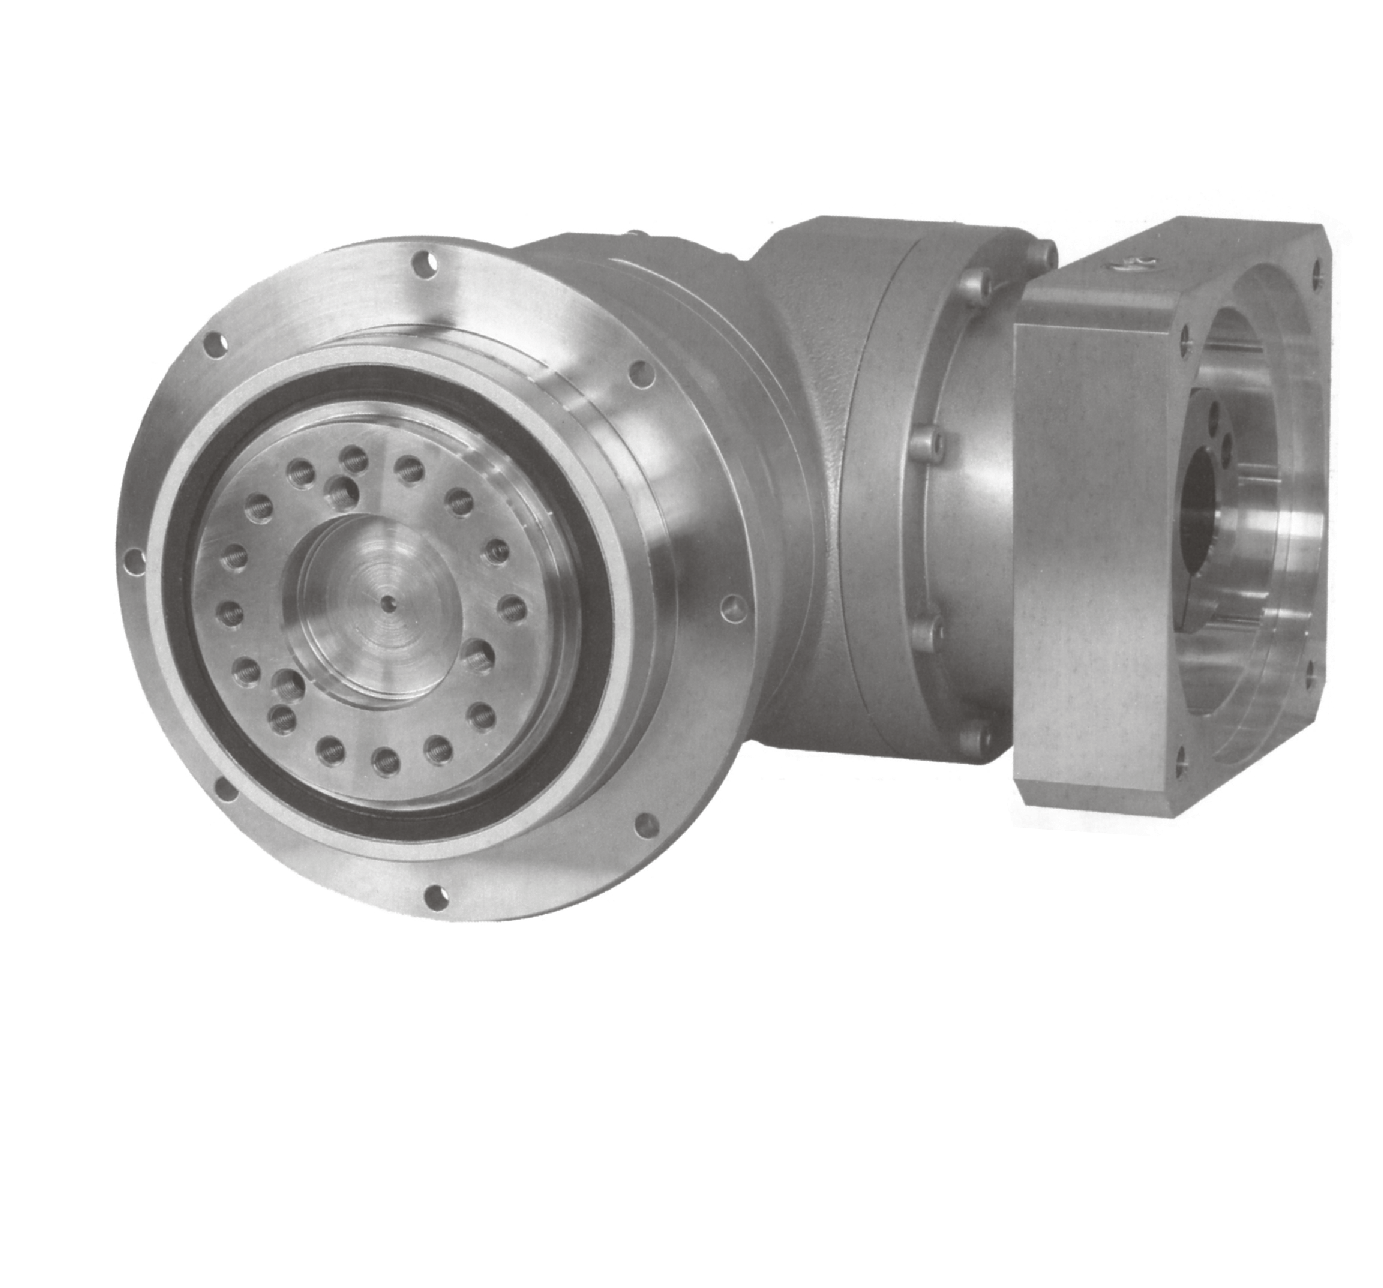 EED EPET precision planetary reducer gearbox